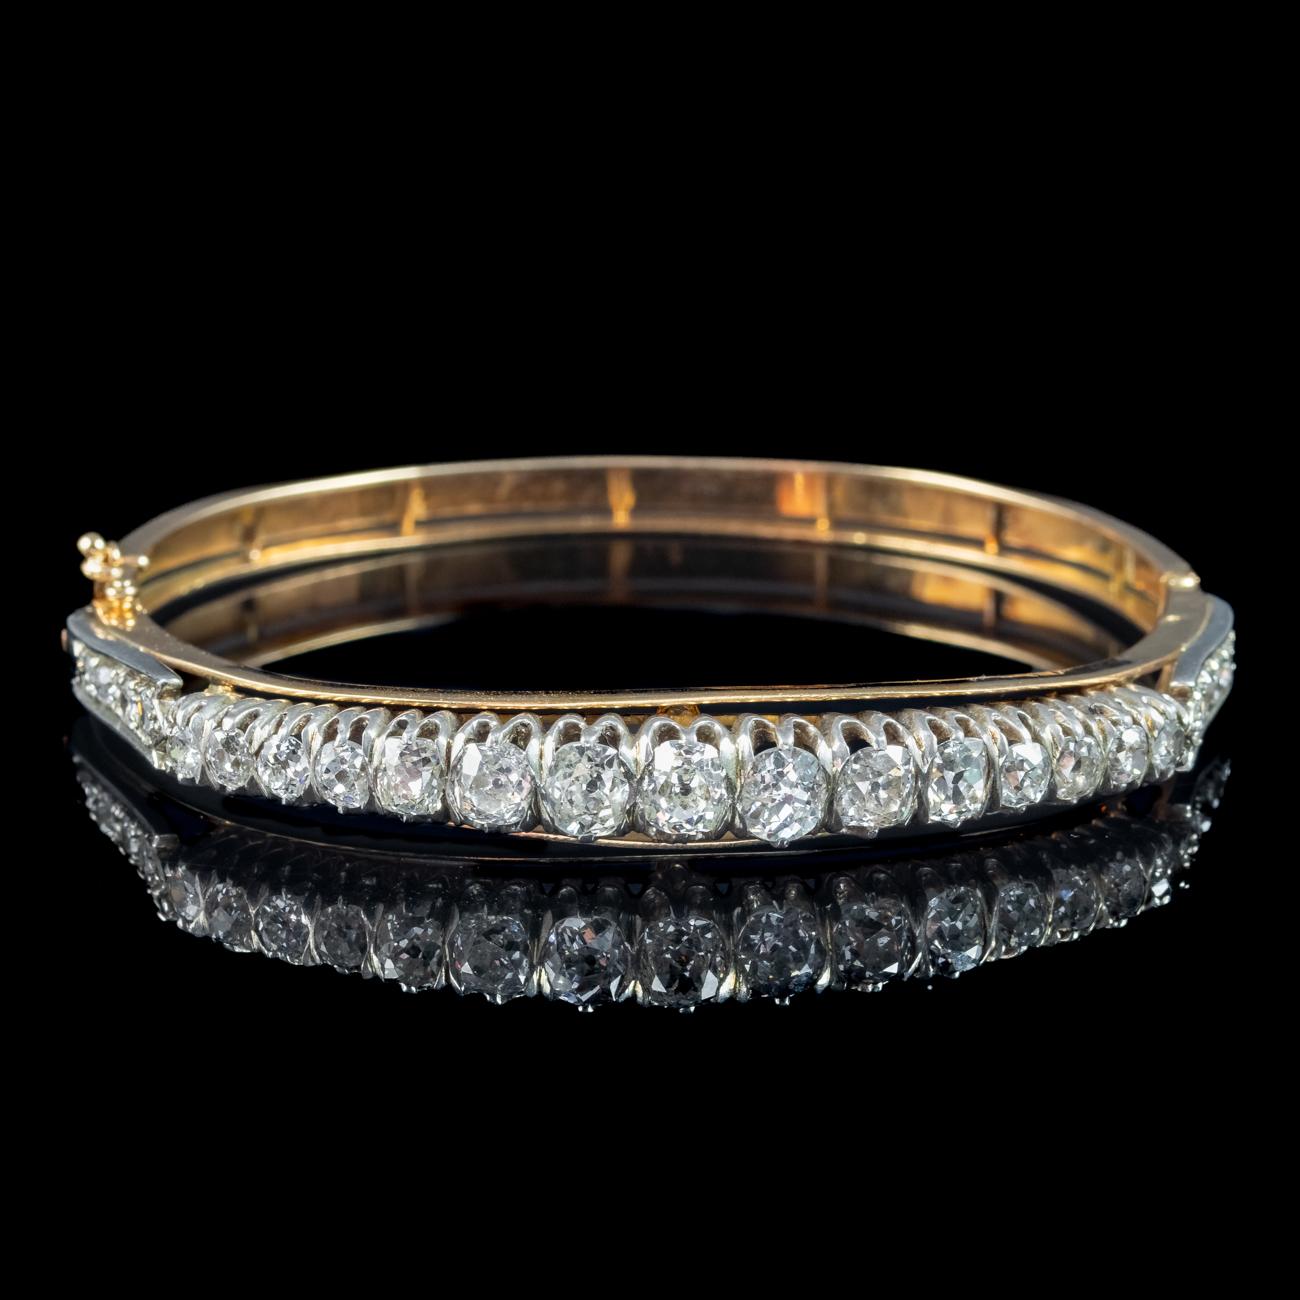 Cushion Cut Antique Victorian French Diamond Bangle Silver 18ct Gold 4.5ct Diamond For Sale